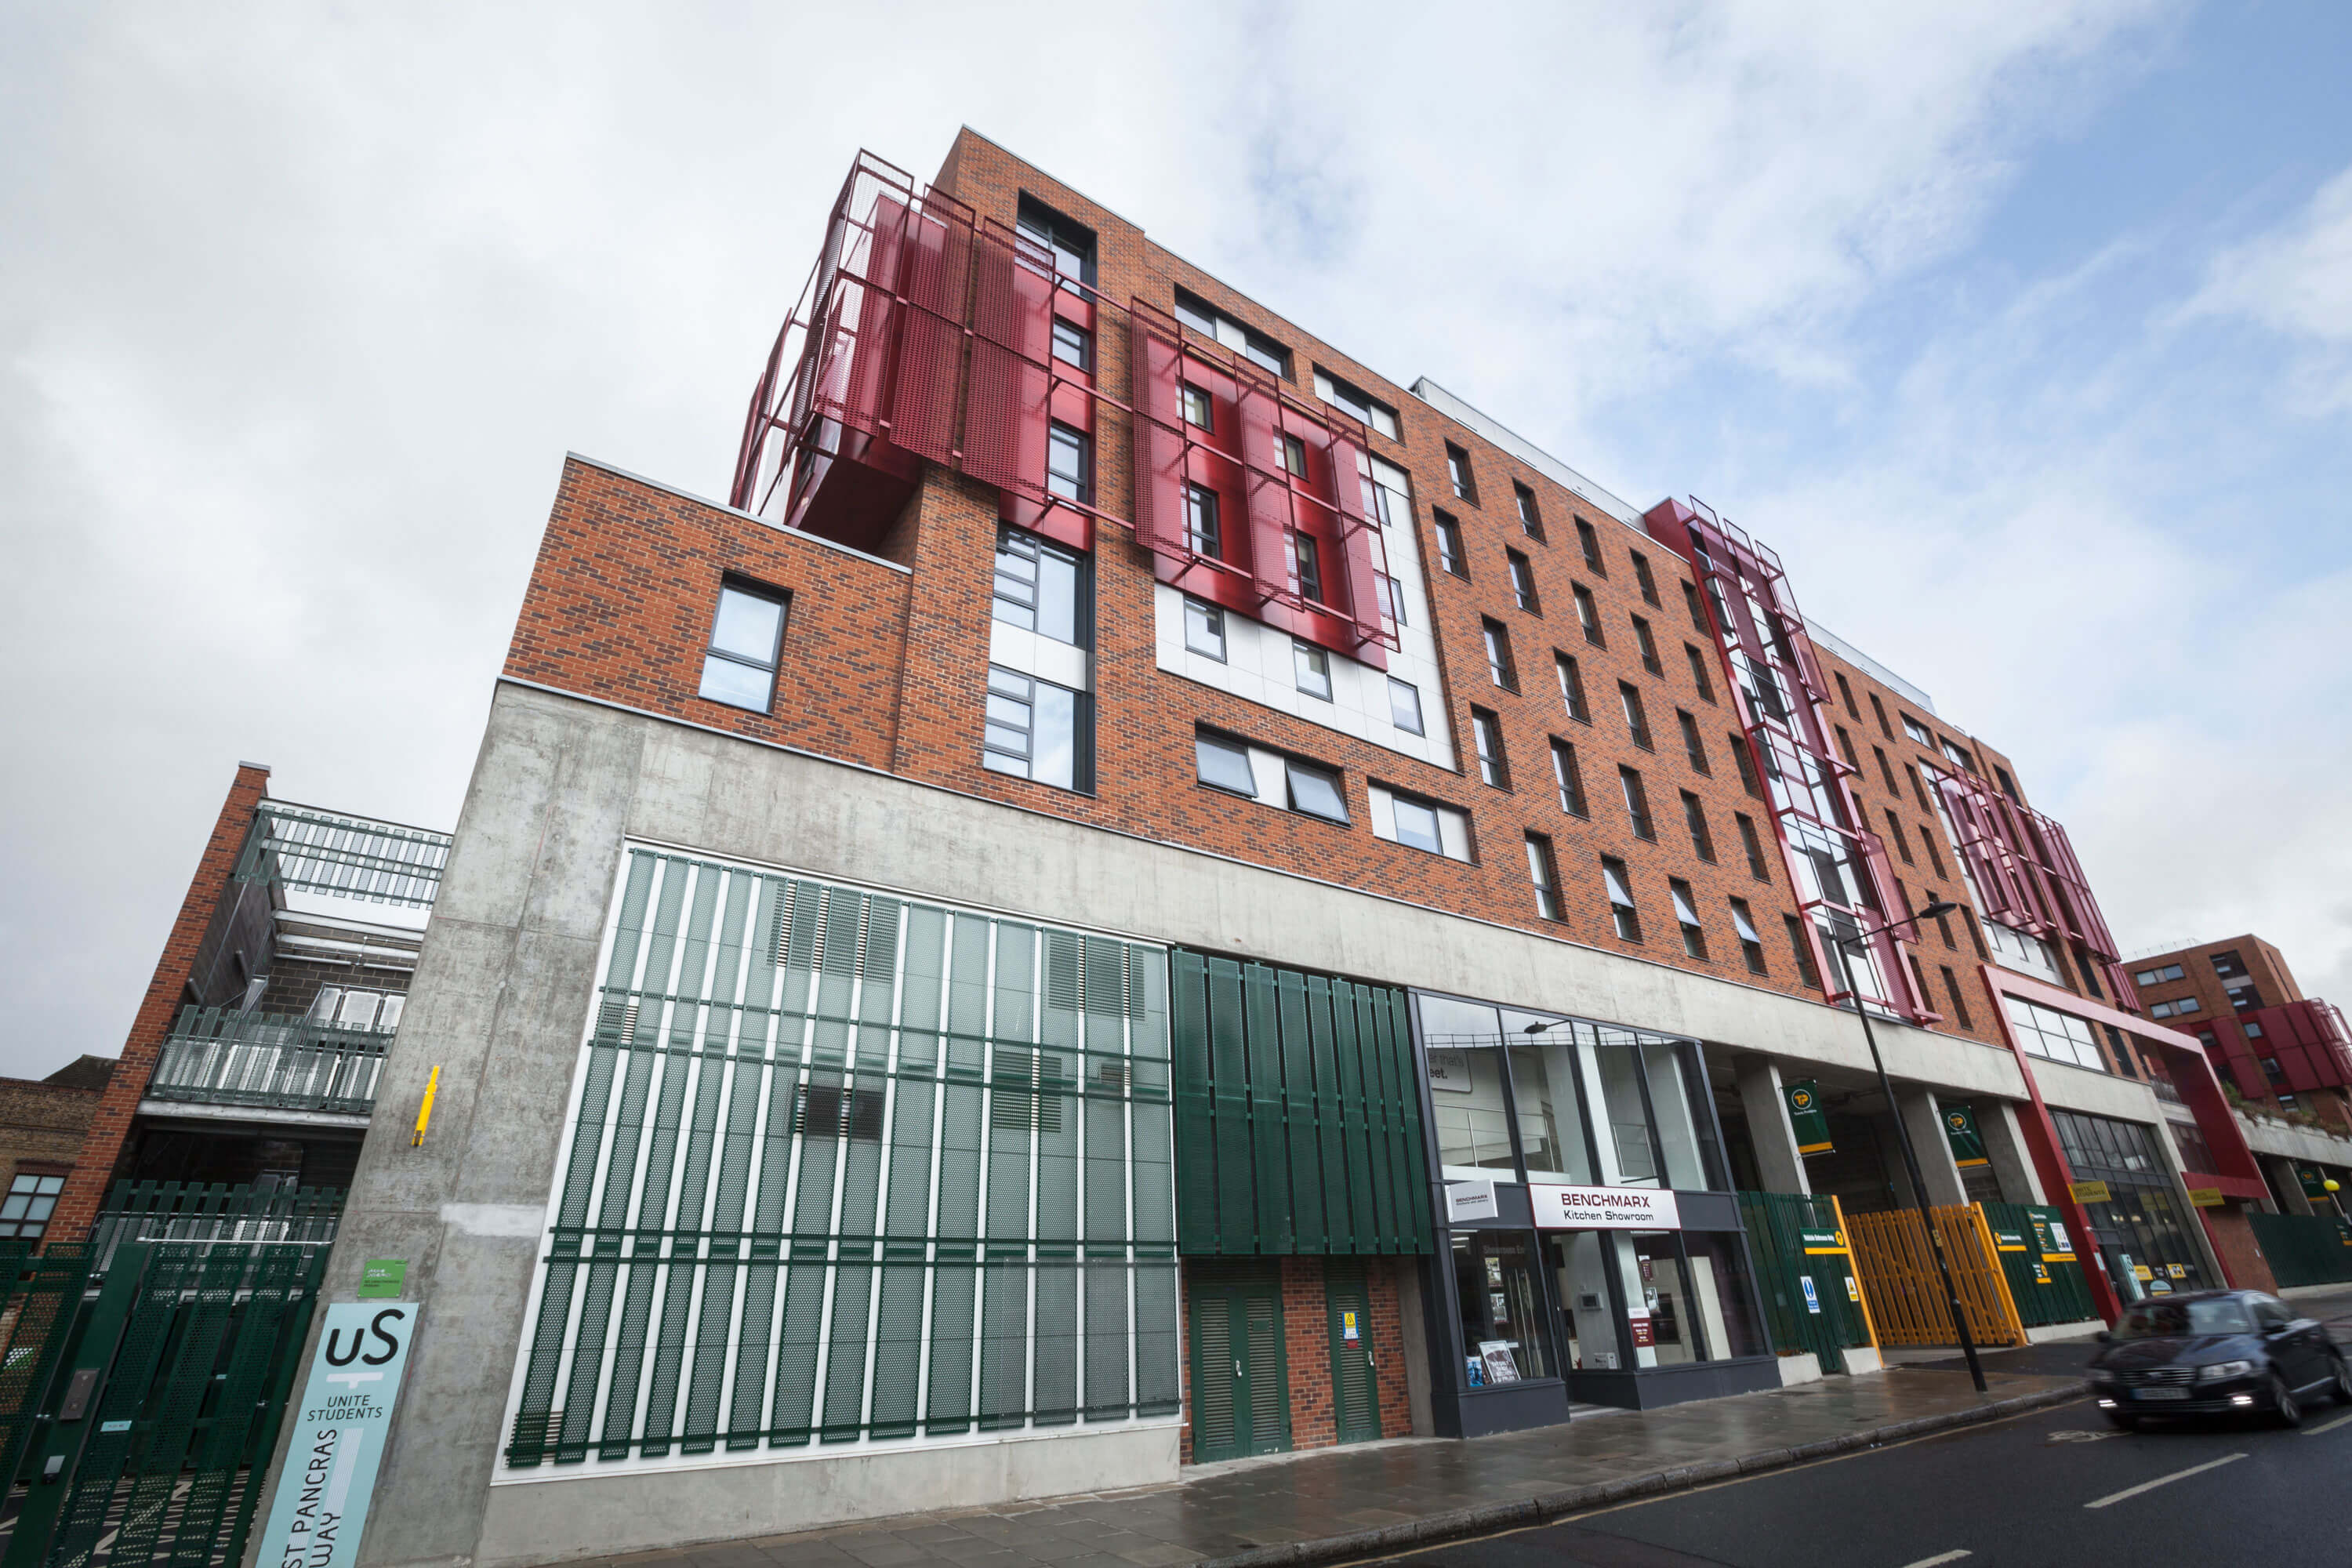 Unite Students accommodation at St Pancras Way in London